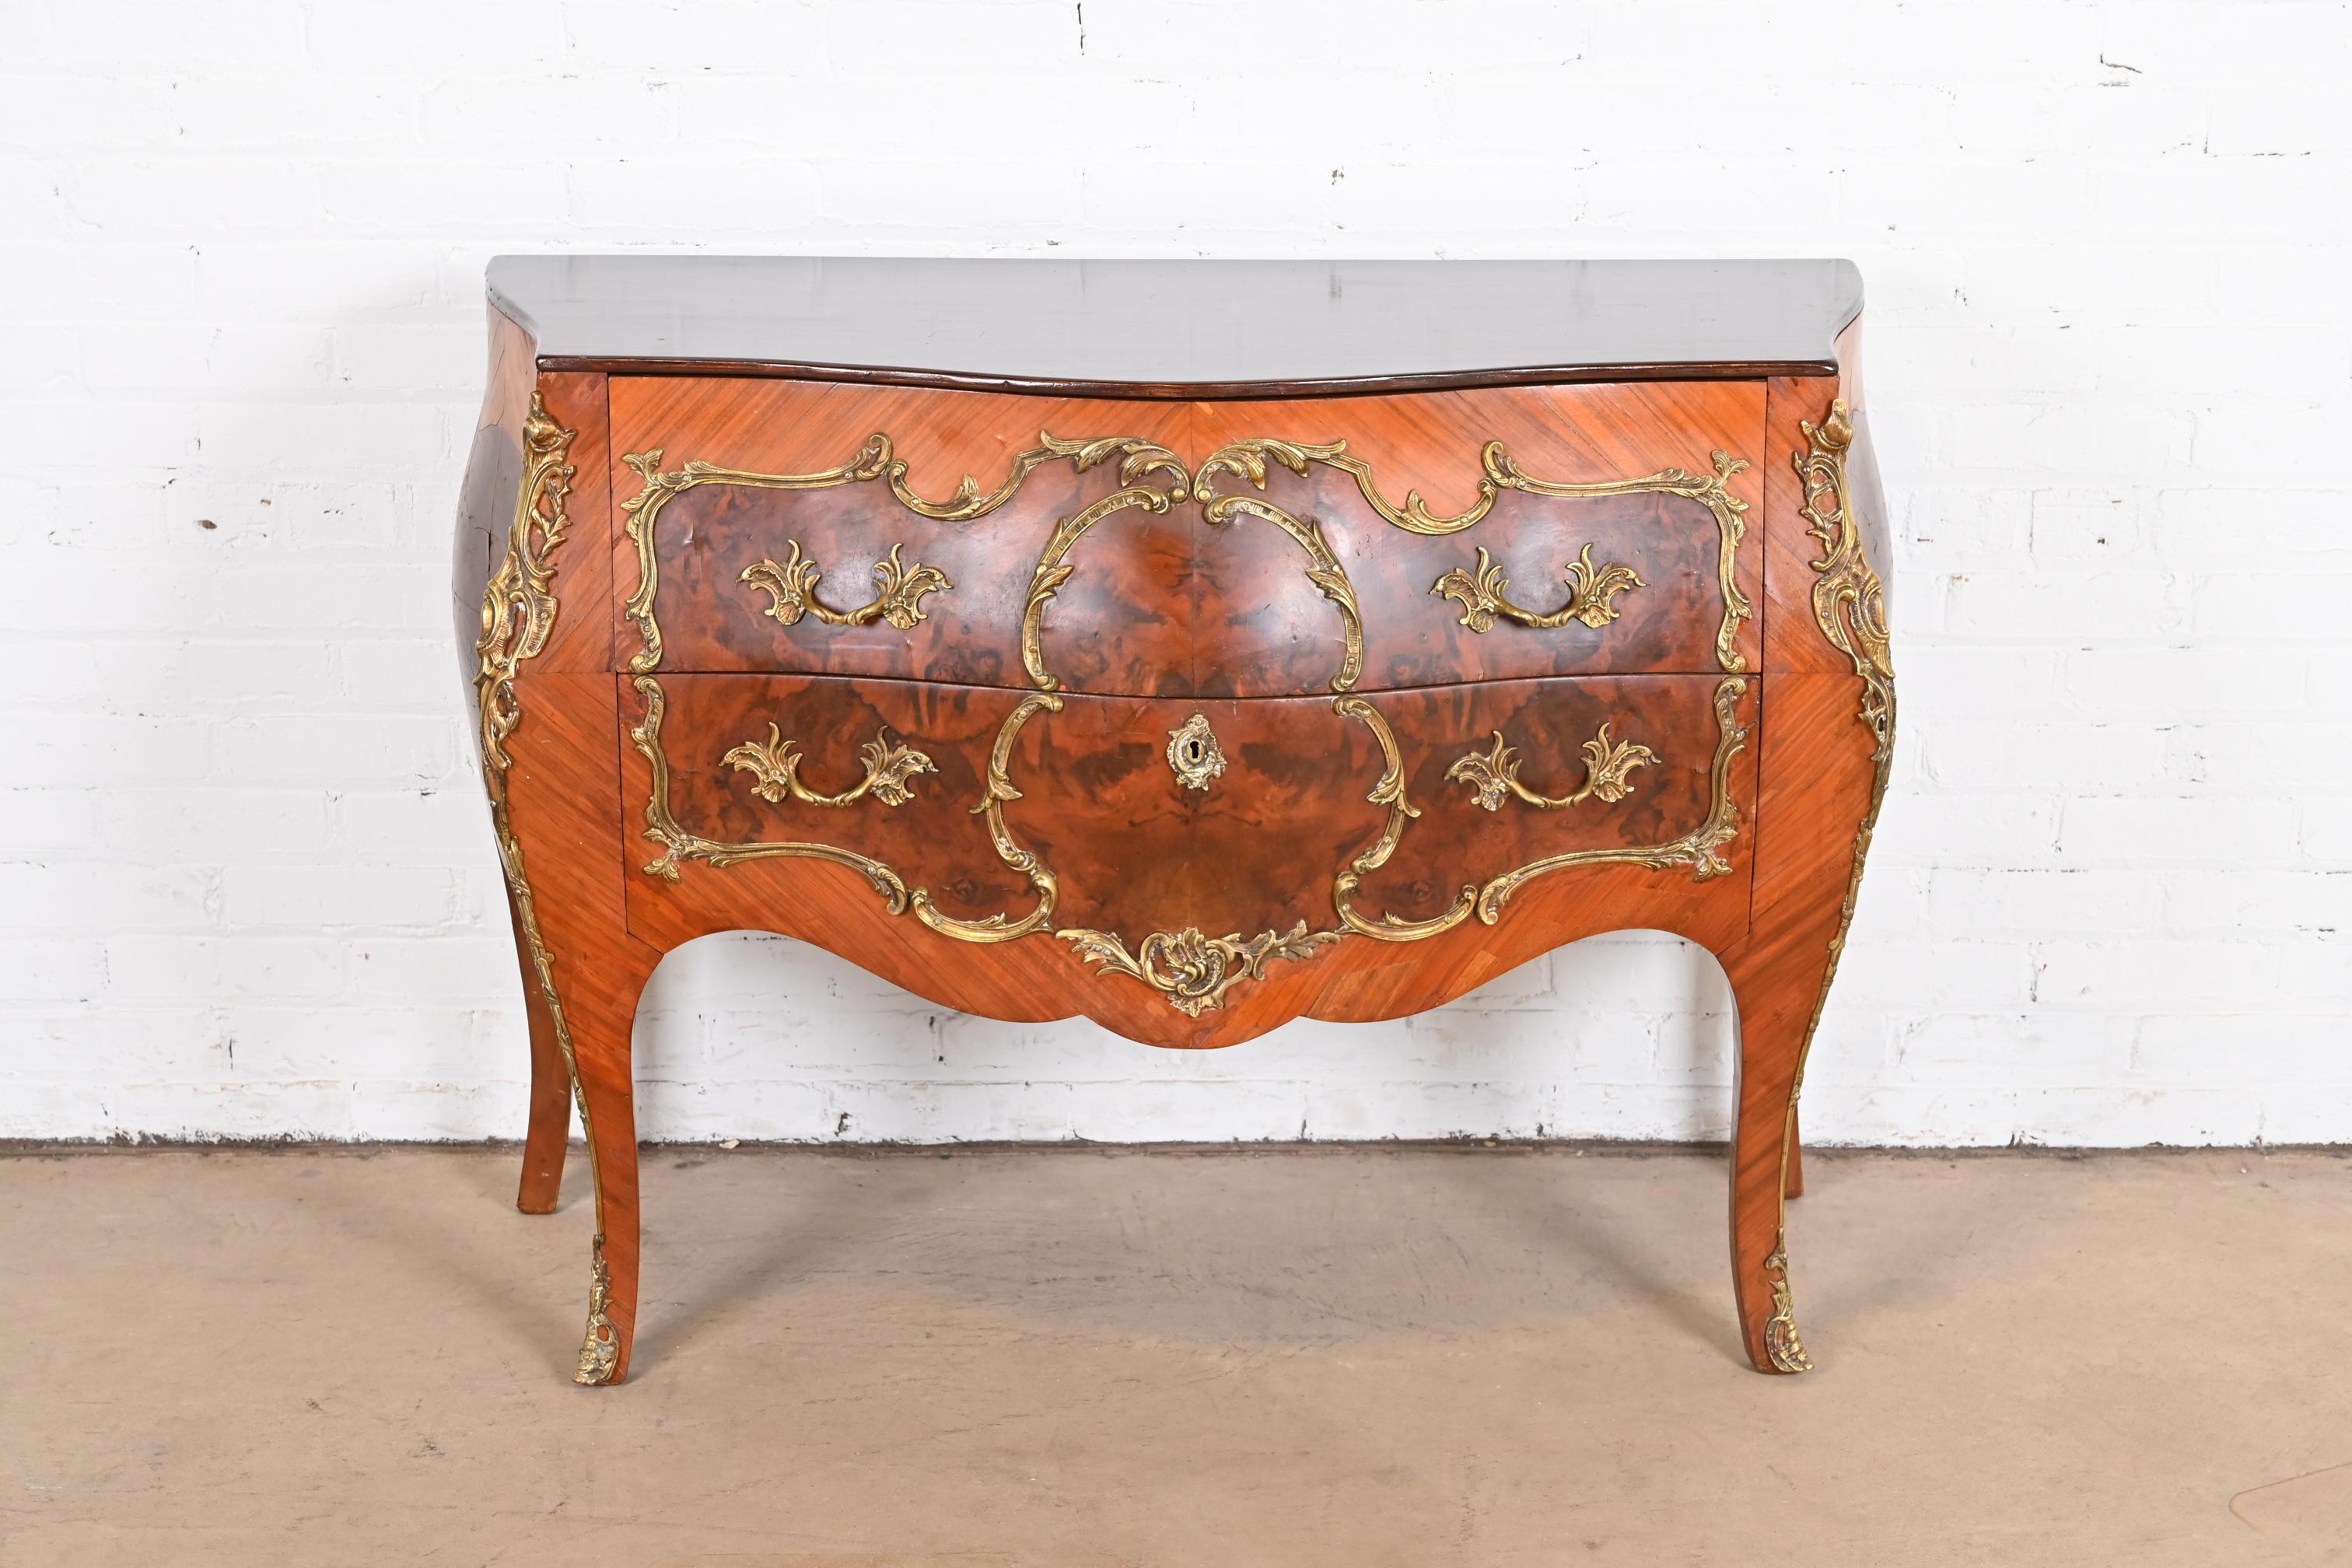 A gorgeous antique French Bombay commode or chest of drawers

France, Early 20th century

Mahogany, with inlaid burled walnut, and mounted bronze ormolu.

Measures: 47